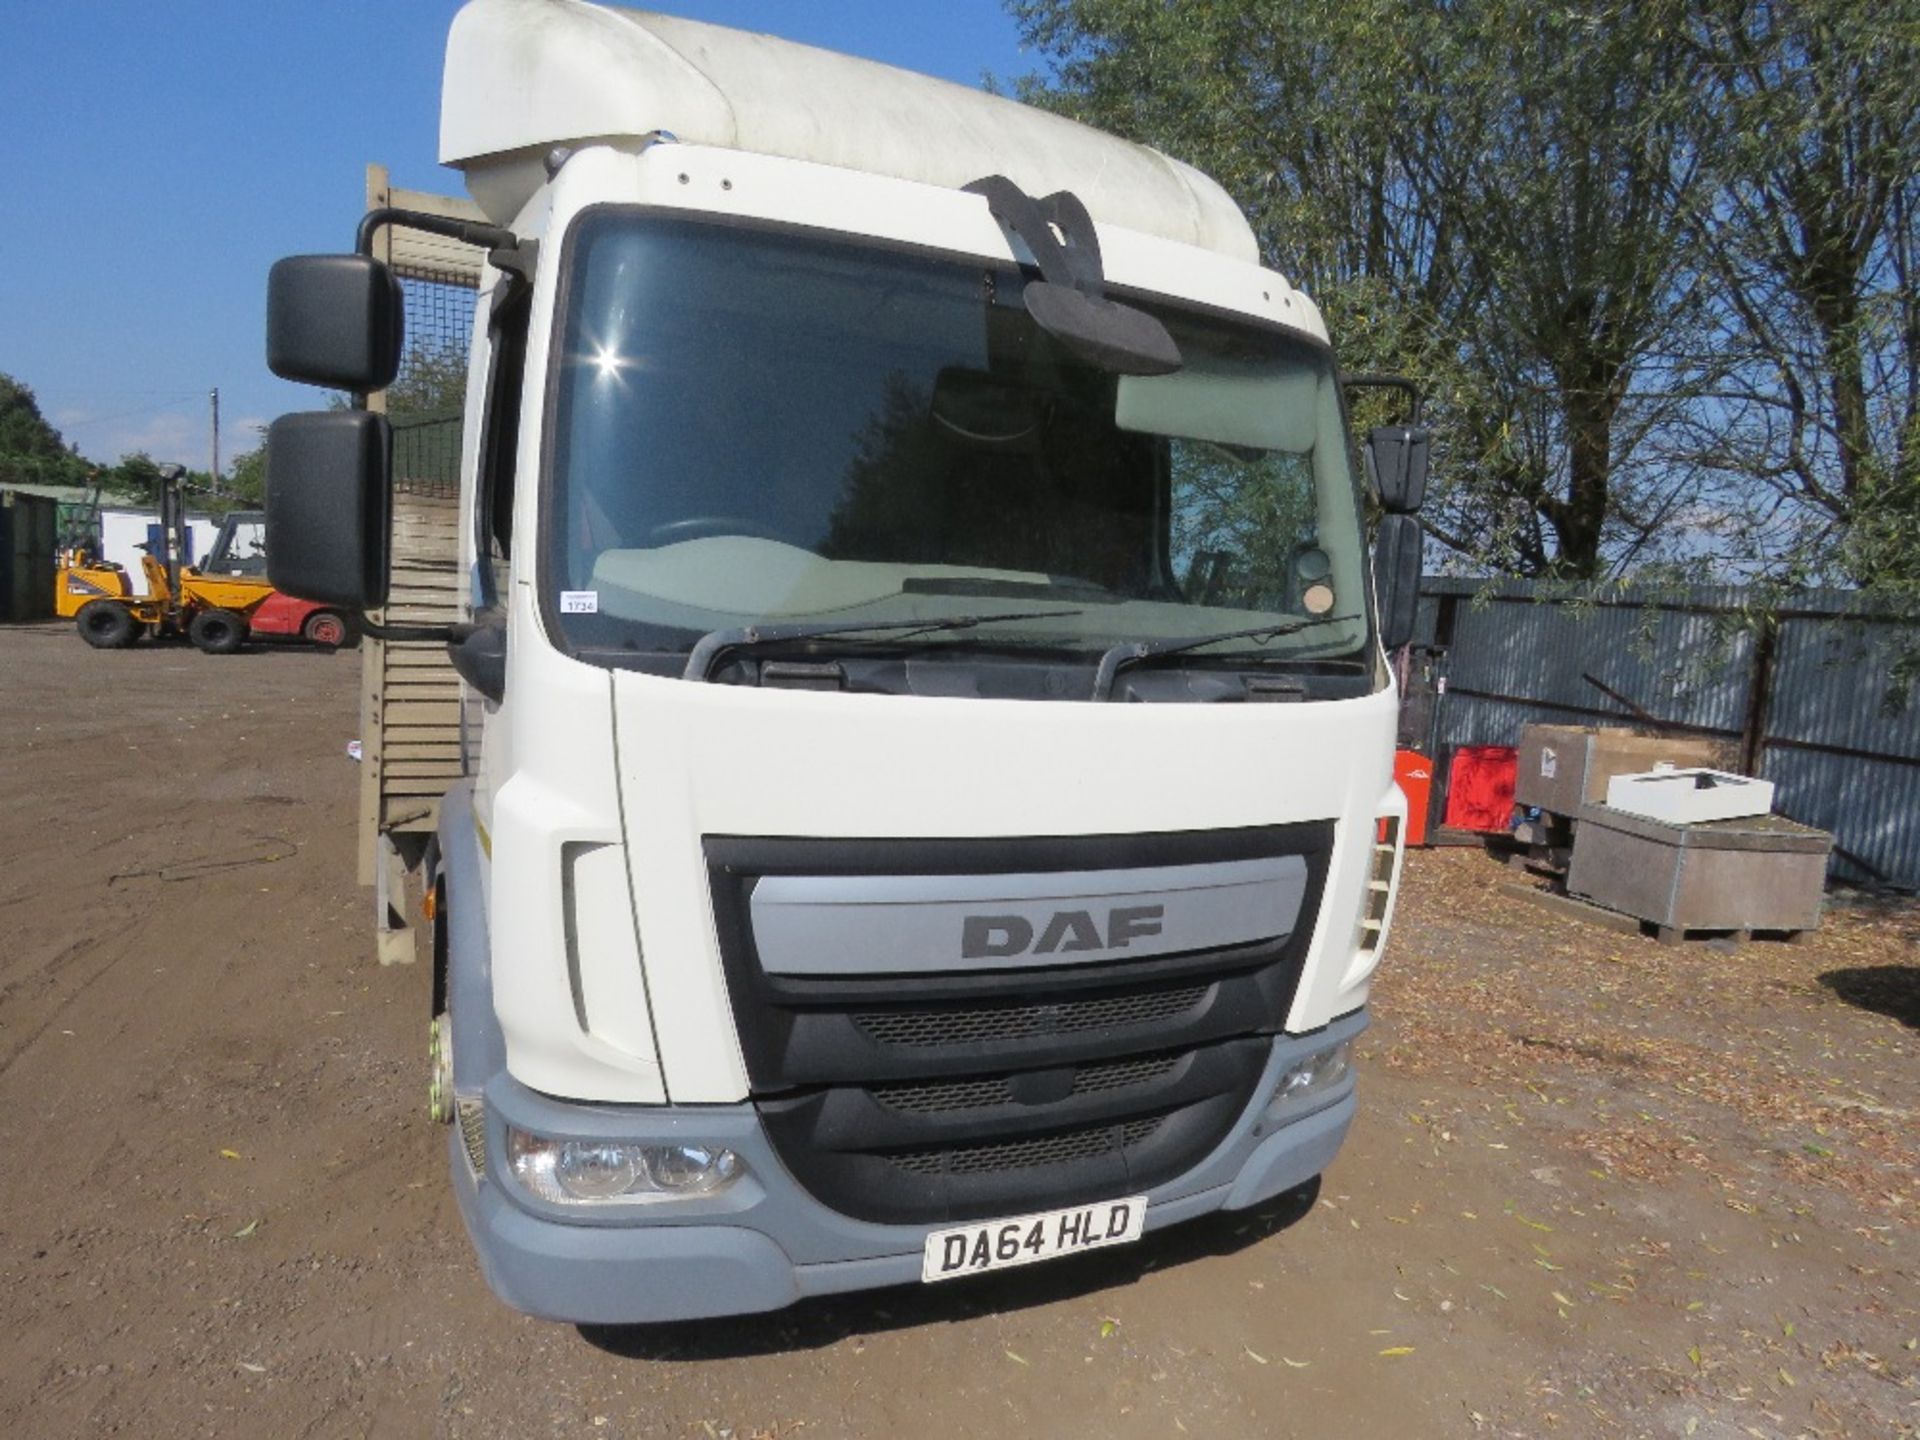 DAF LF180 FLAT BED LORRY REG:DA64 HLD. EURO 6. 7500KG RATED. AUTO GEARBOX. SOURCED FROM COMPANY LIQU - Image 2 of 13